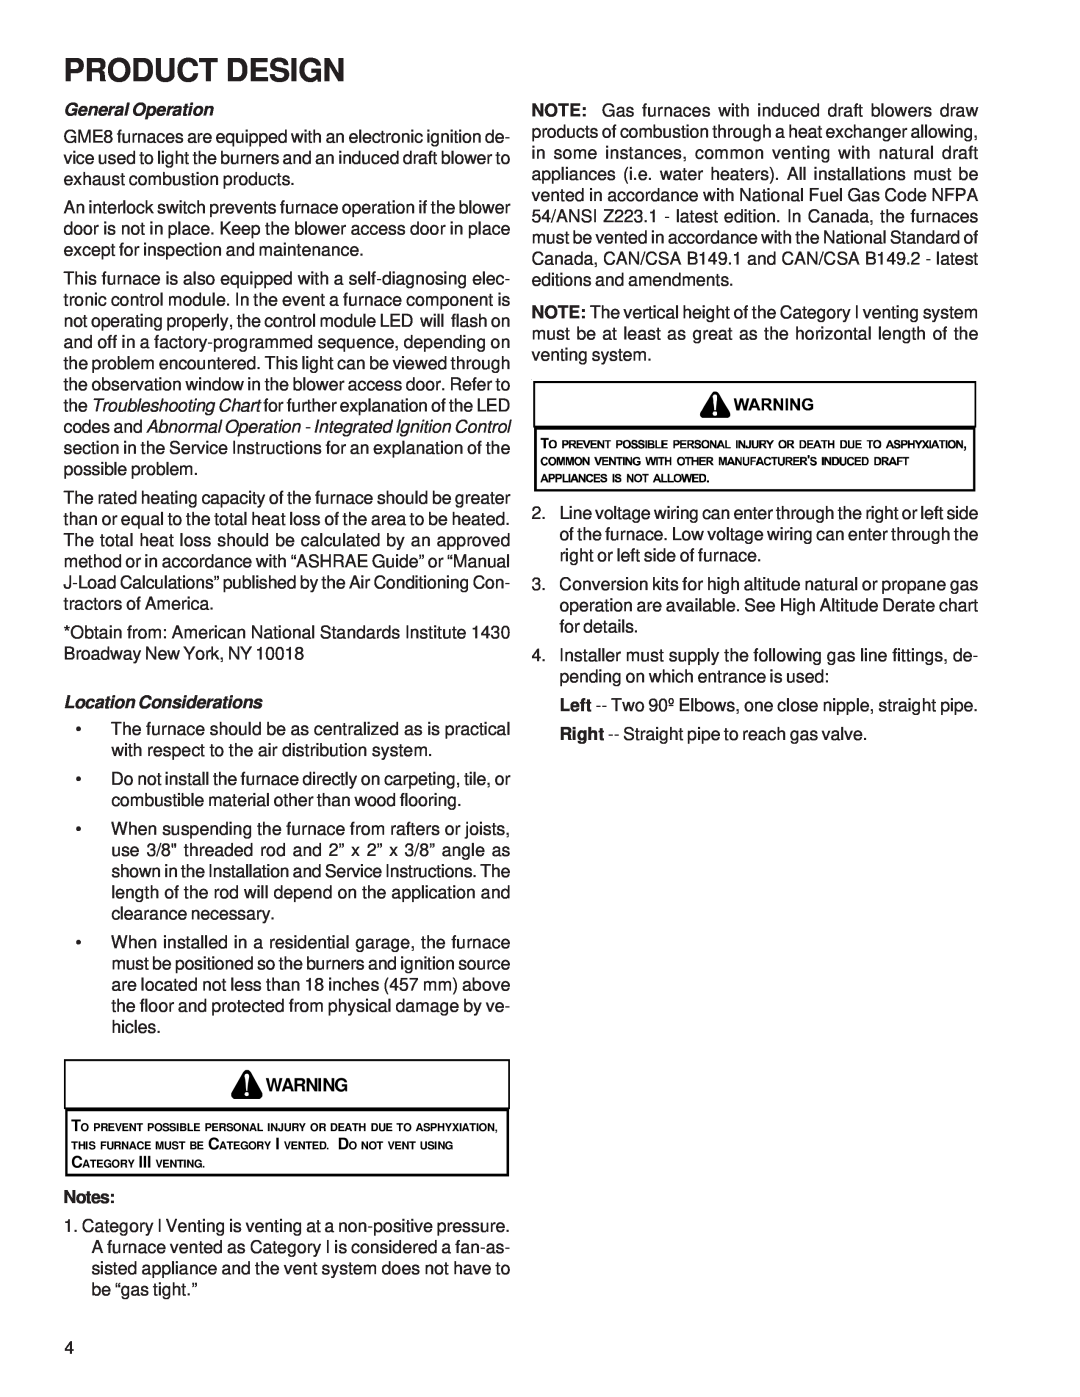 Goodman Mfg GME8 service manual Product Design, General Operation, Location Considerations 